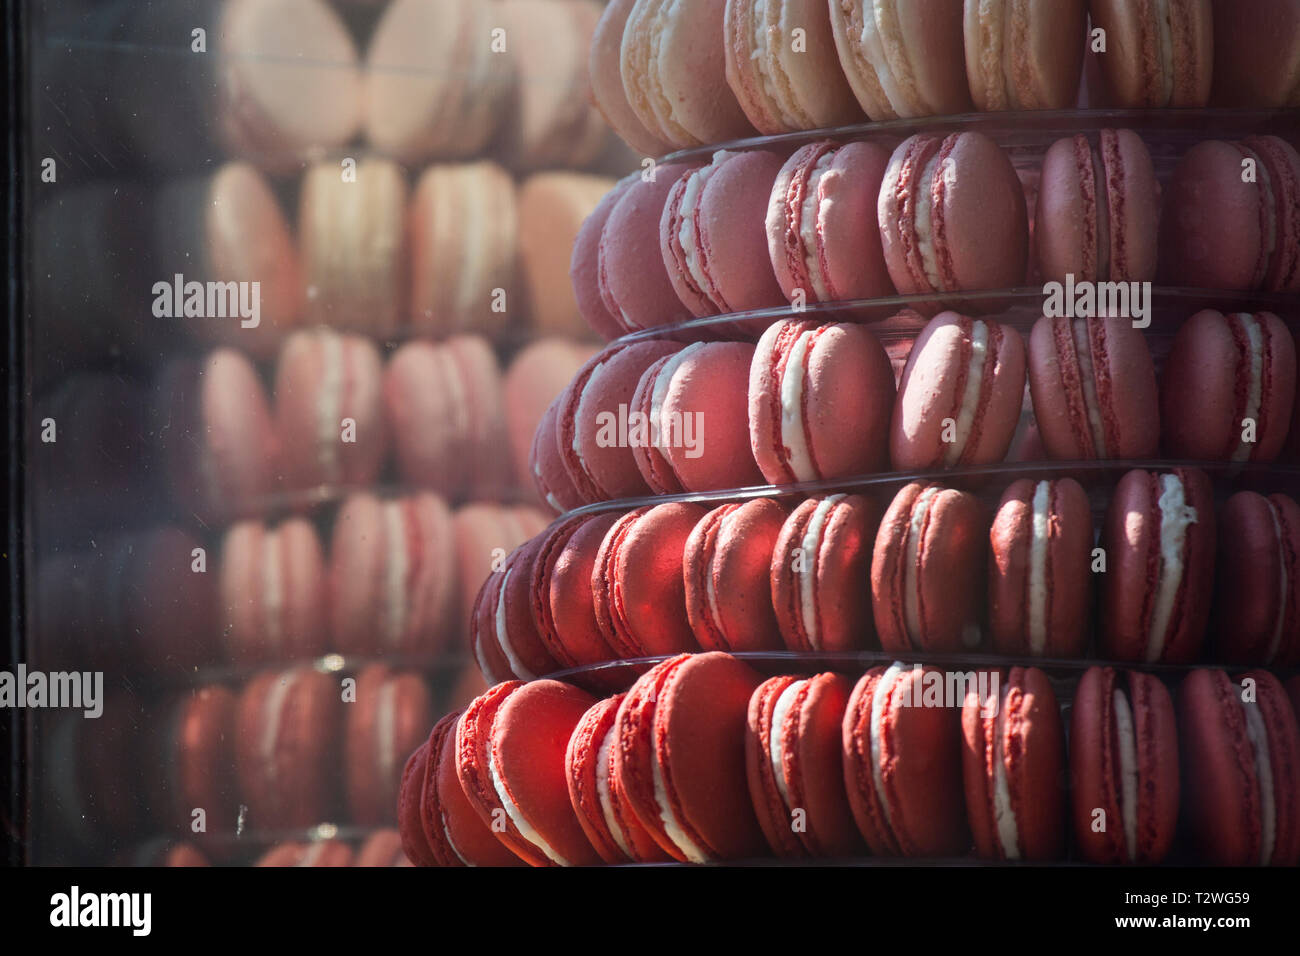 French Macarons in a bakery window Stock Photo